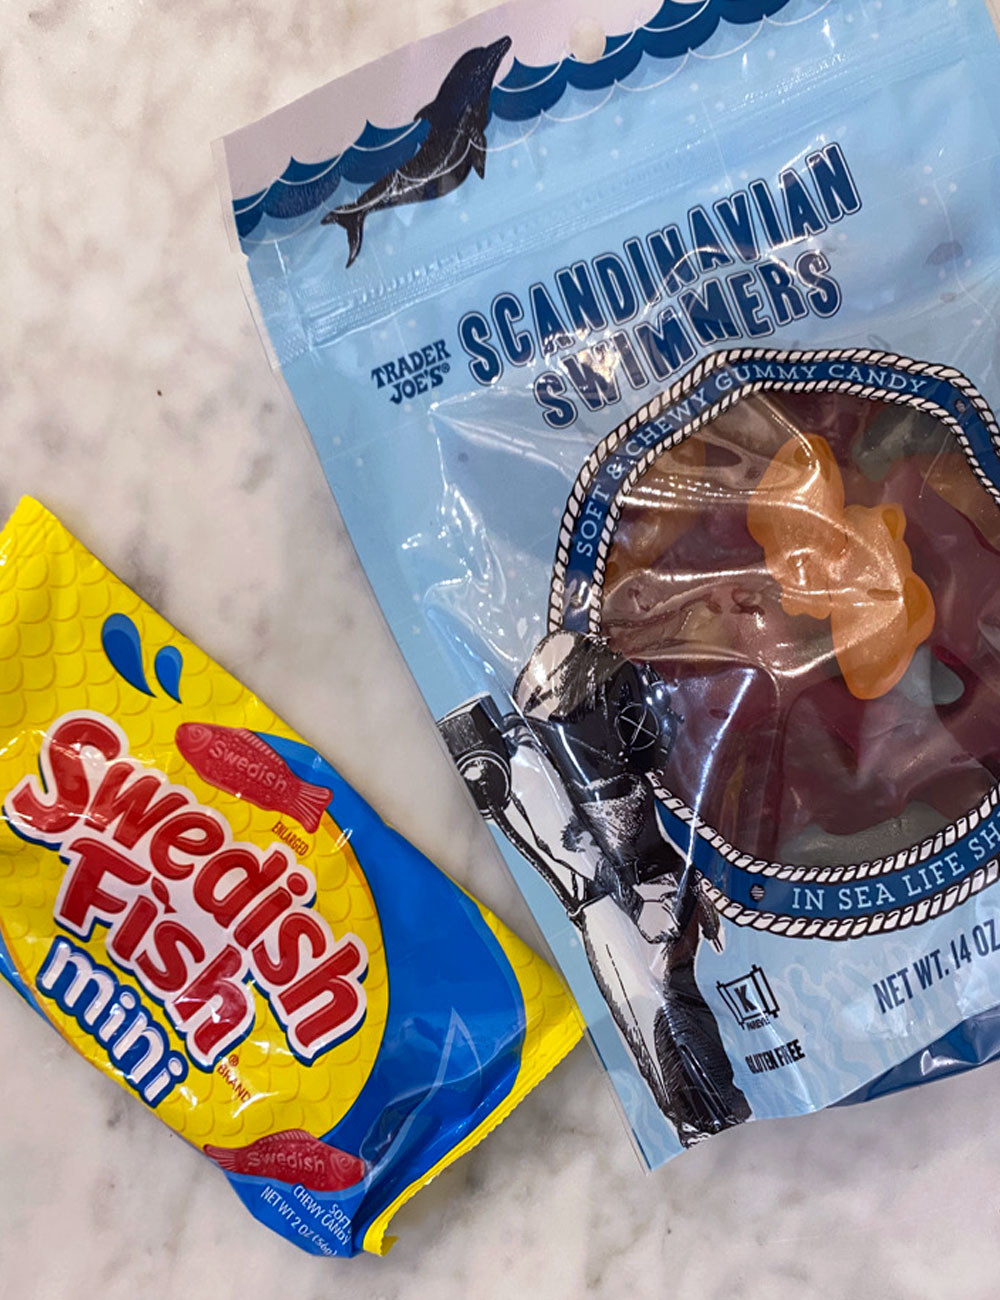 Swedish fish and Scandinavian Swimmers in packaging